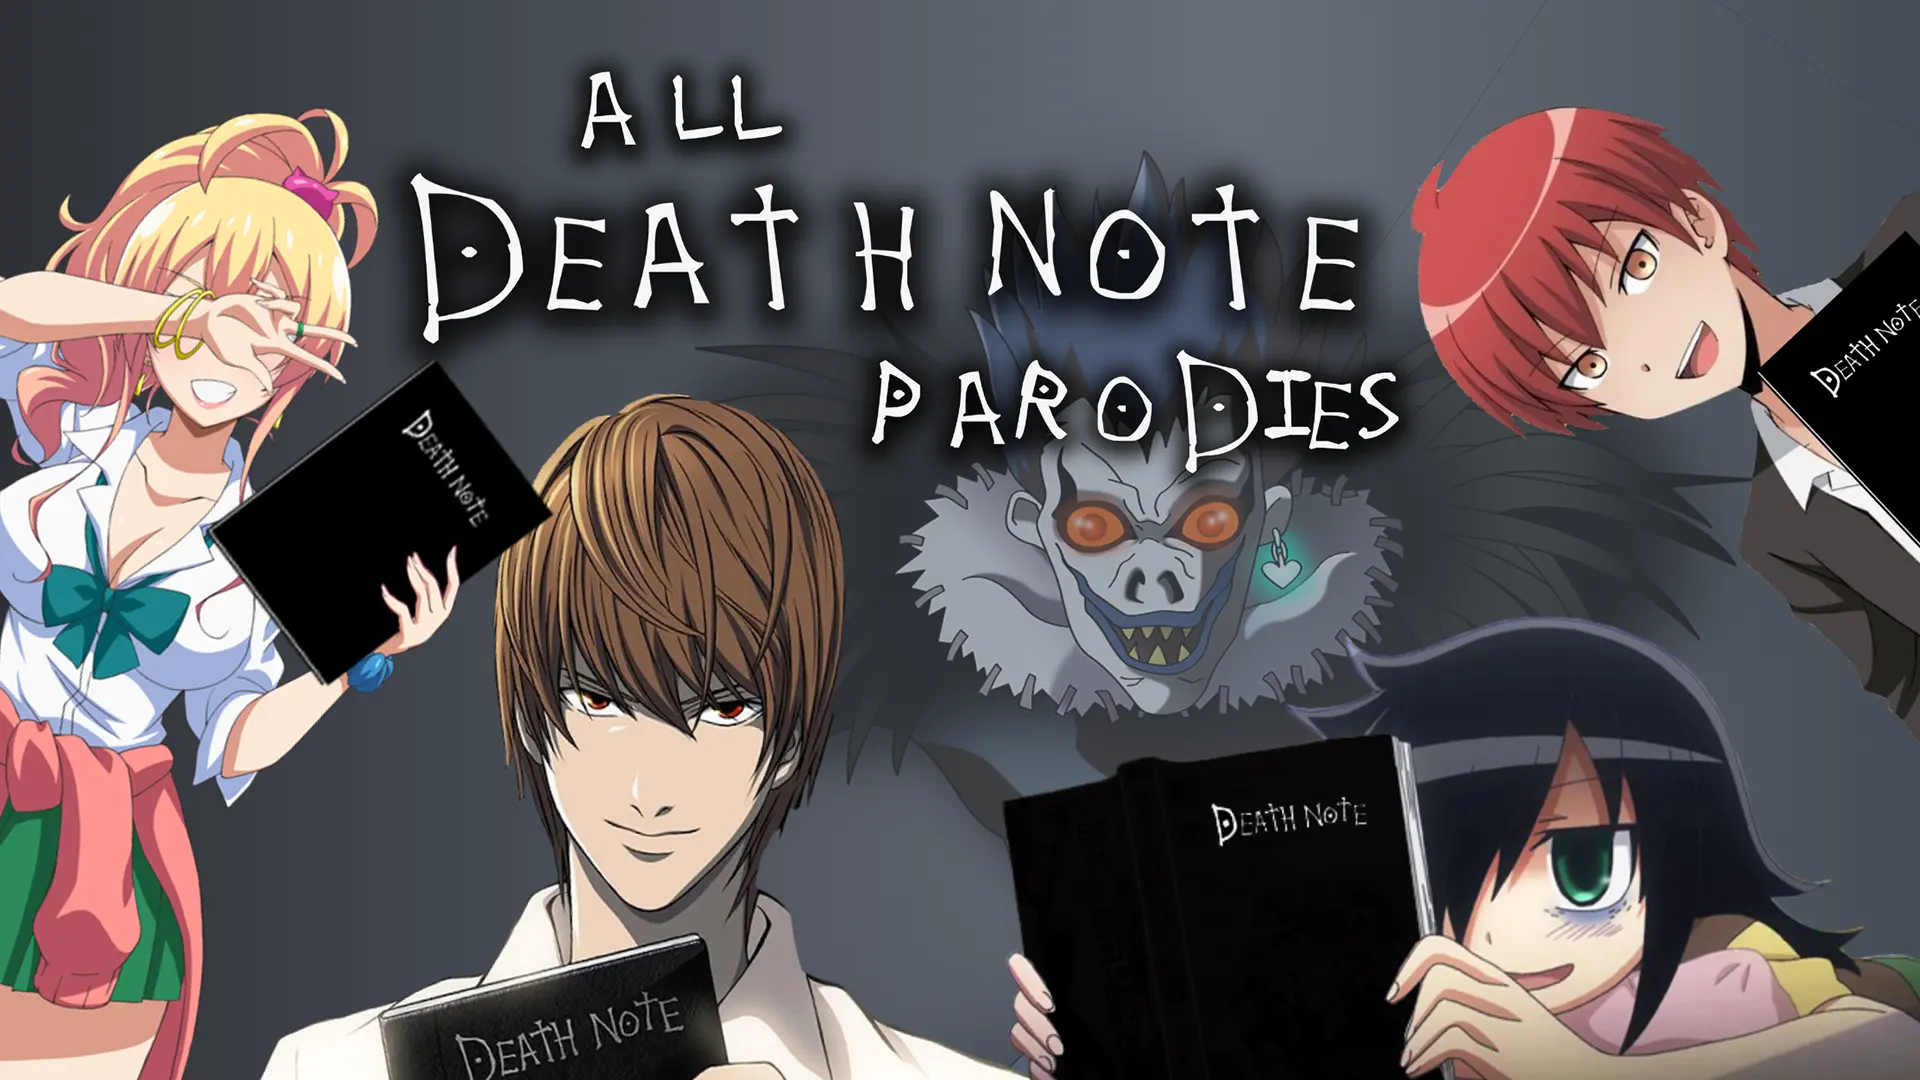 funny death note parodies references